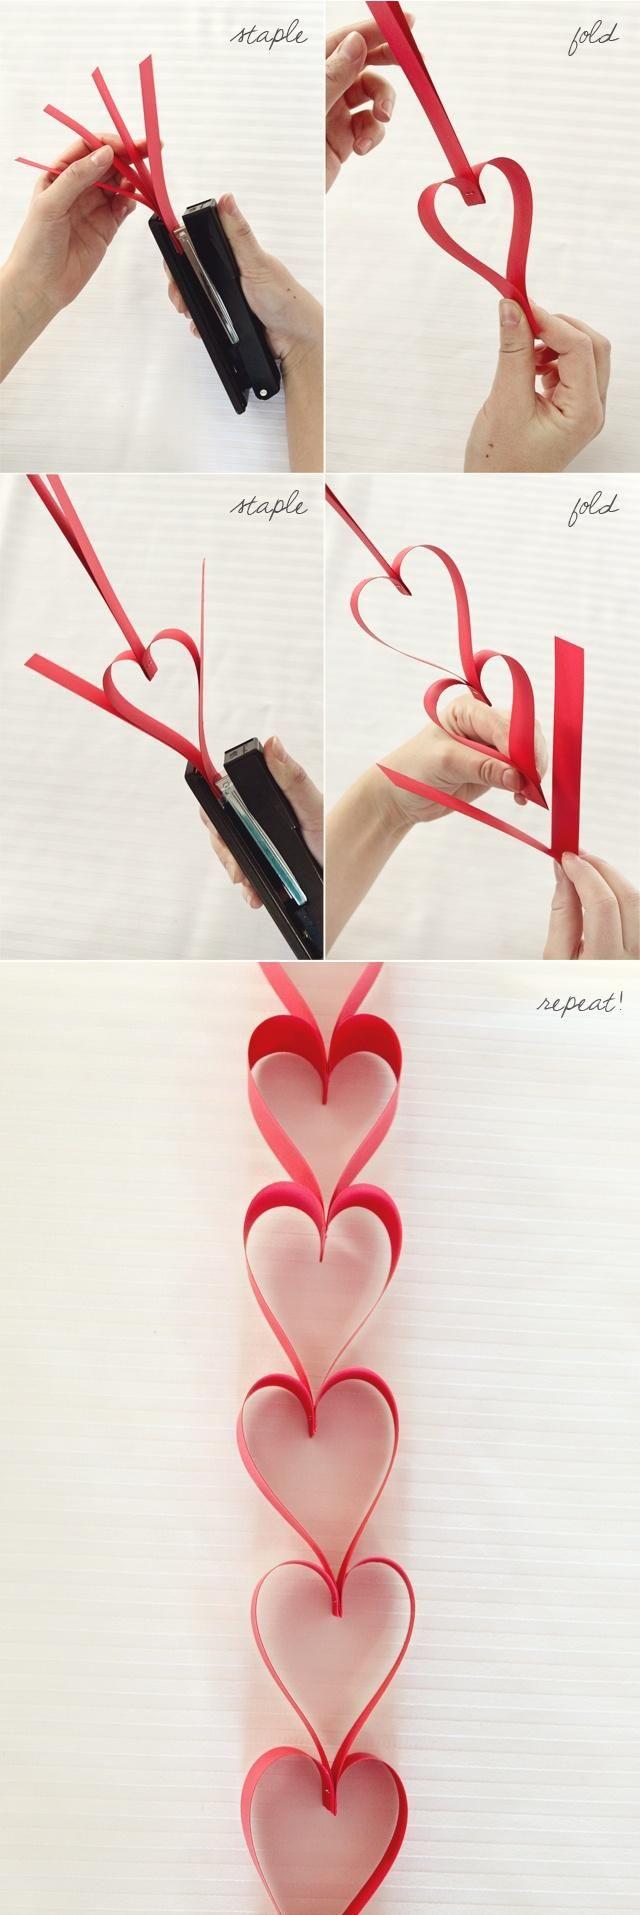 Wedding - 25 Creative Valentines Crafts That Will Knock Your Kids' Socks Off